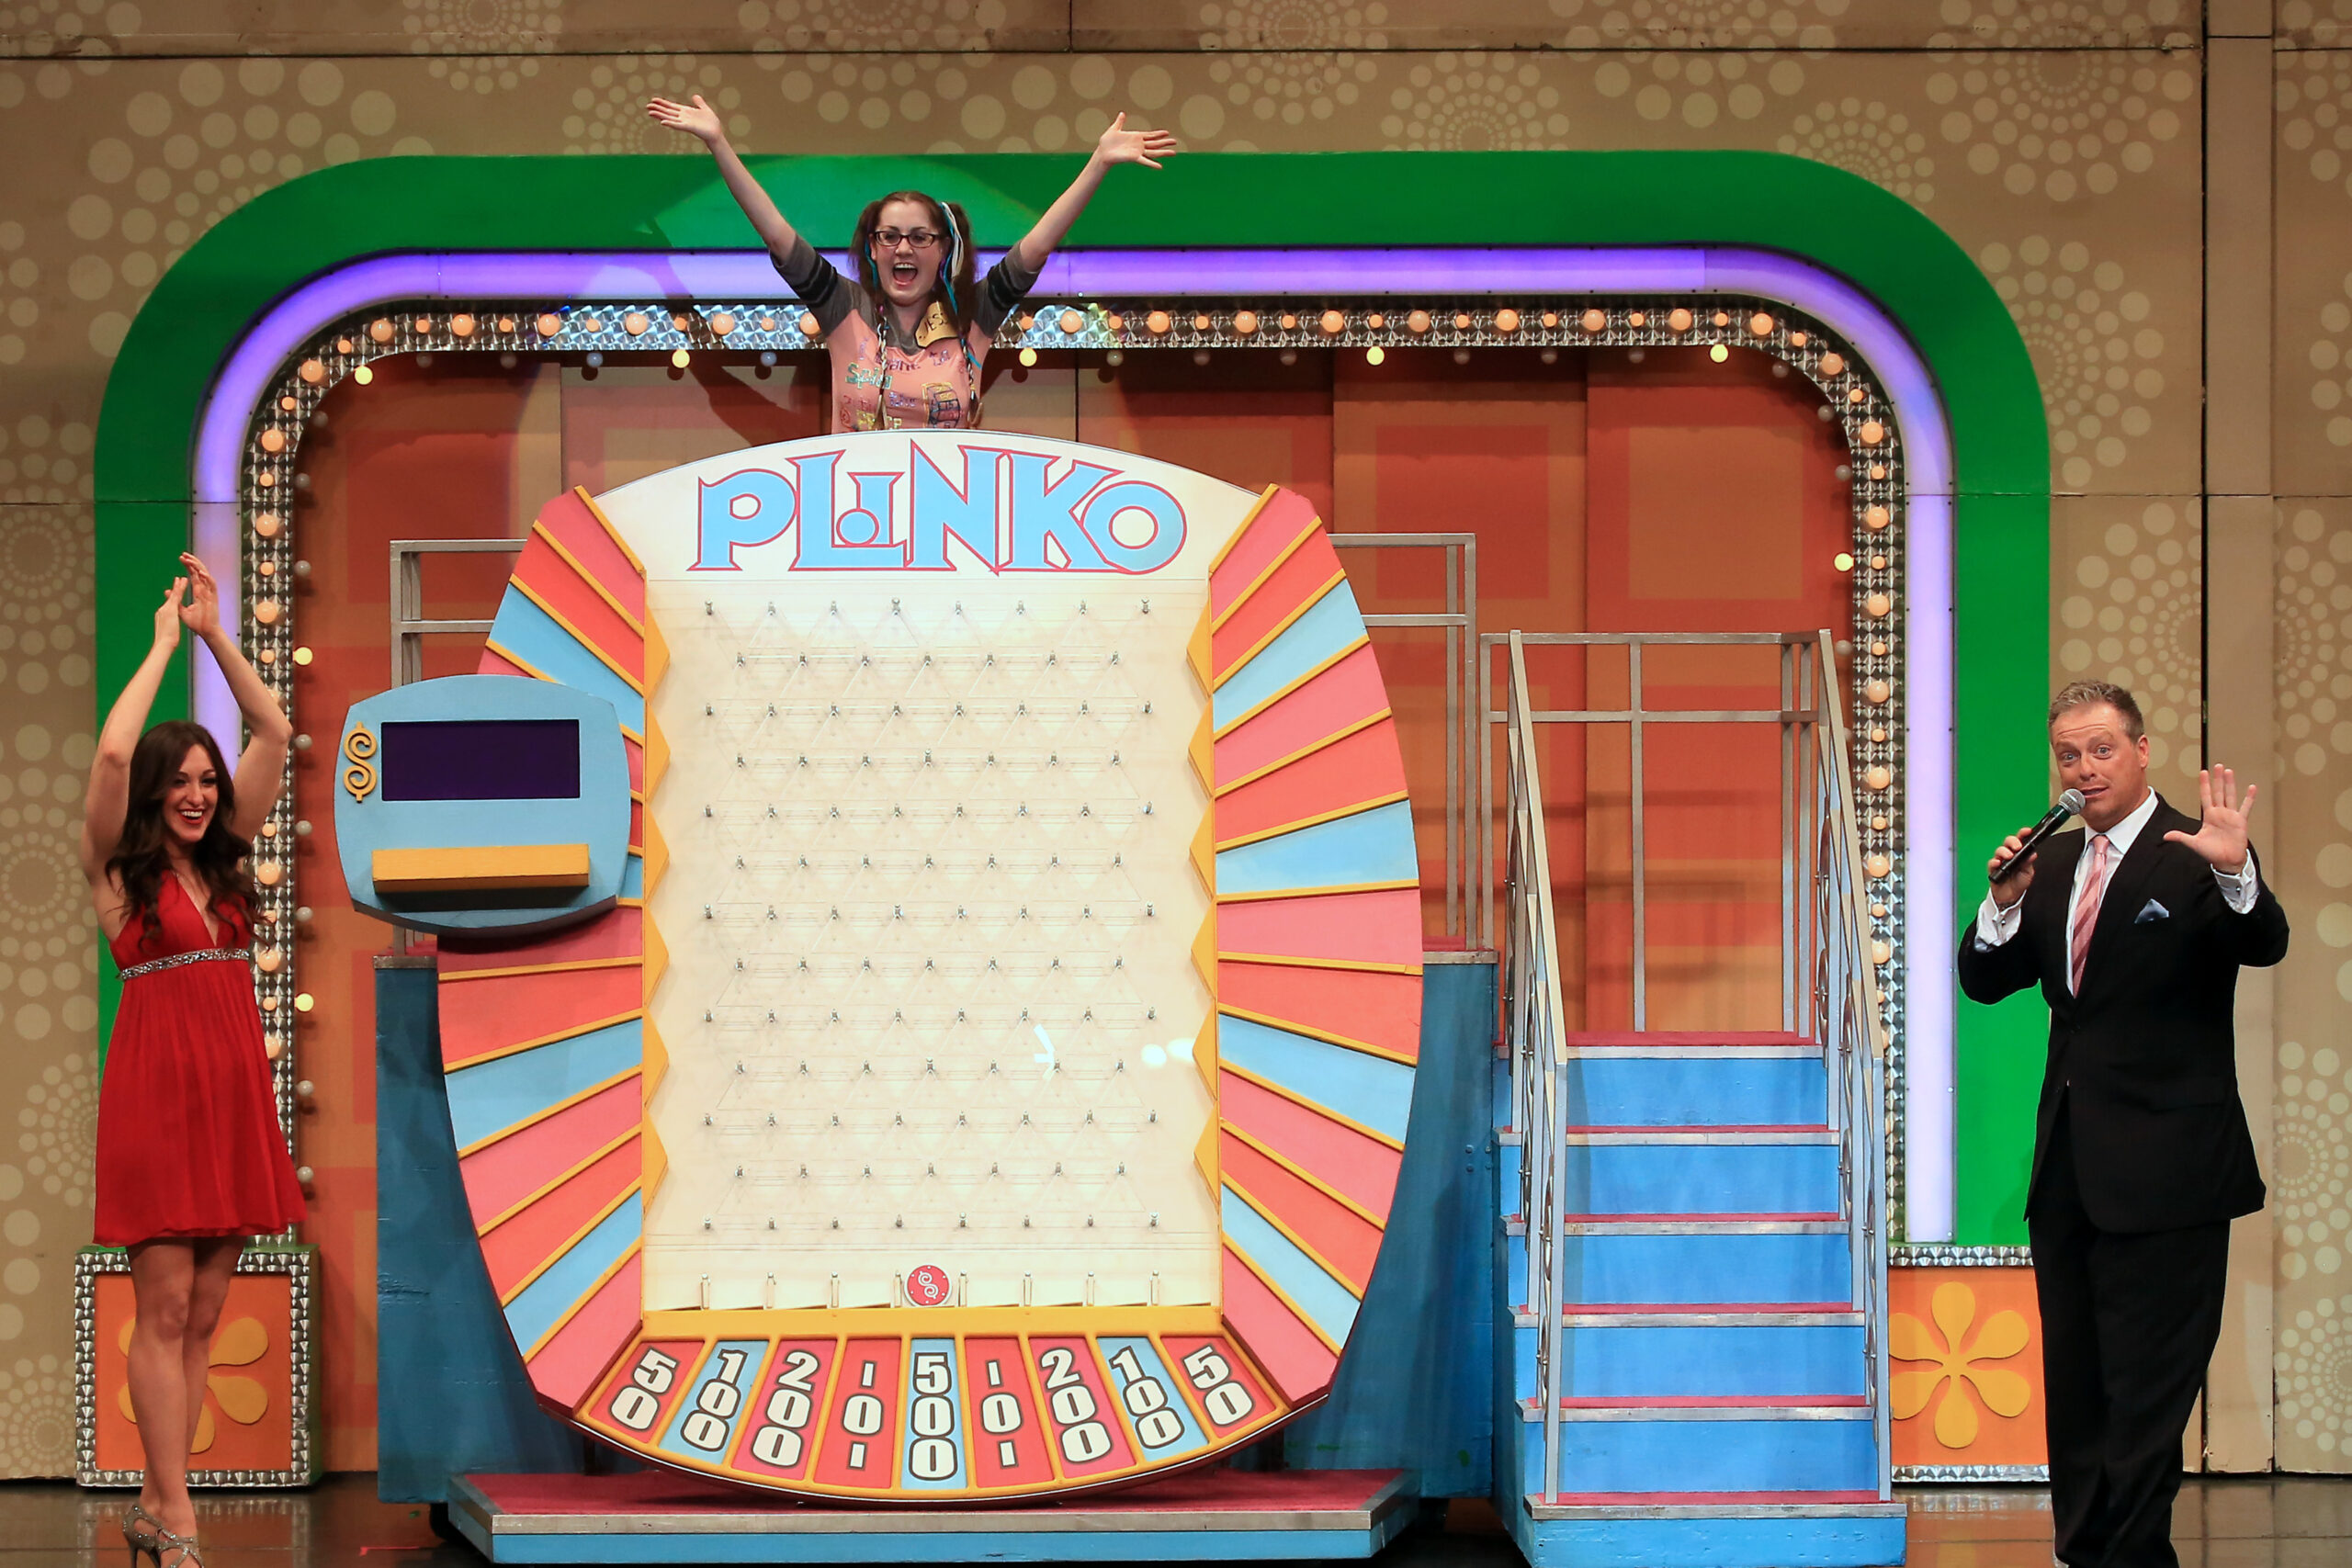 The Price Is Right Live is coming to town. Its host shares what to